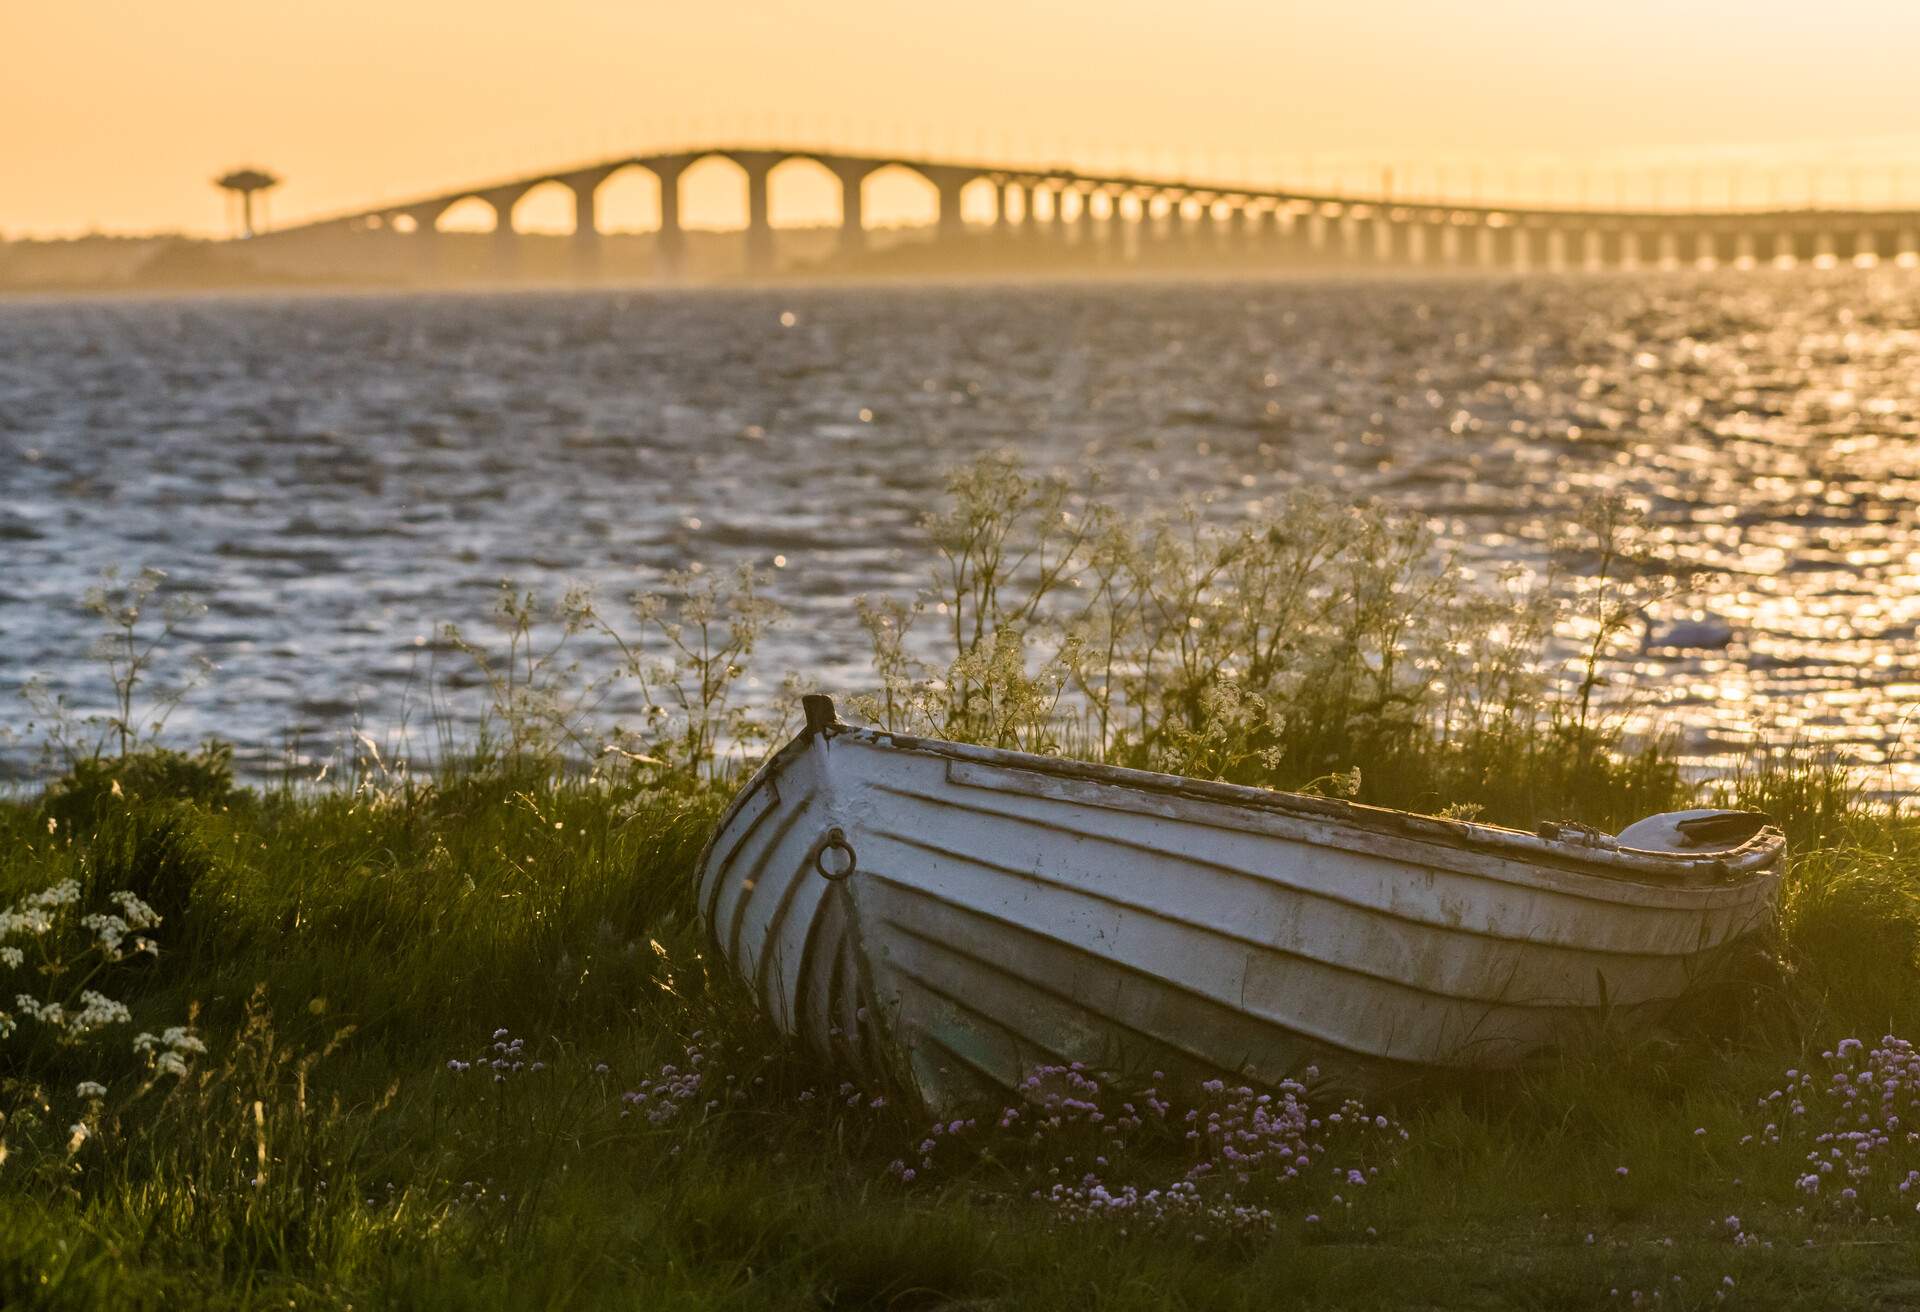 The swedish Oland Bridge with an old weathered rowing boat on land in the front